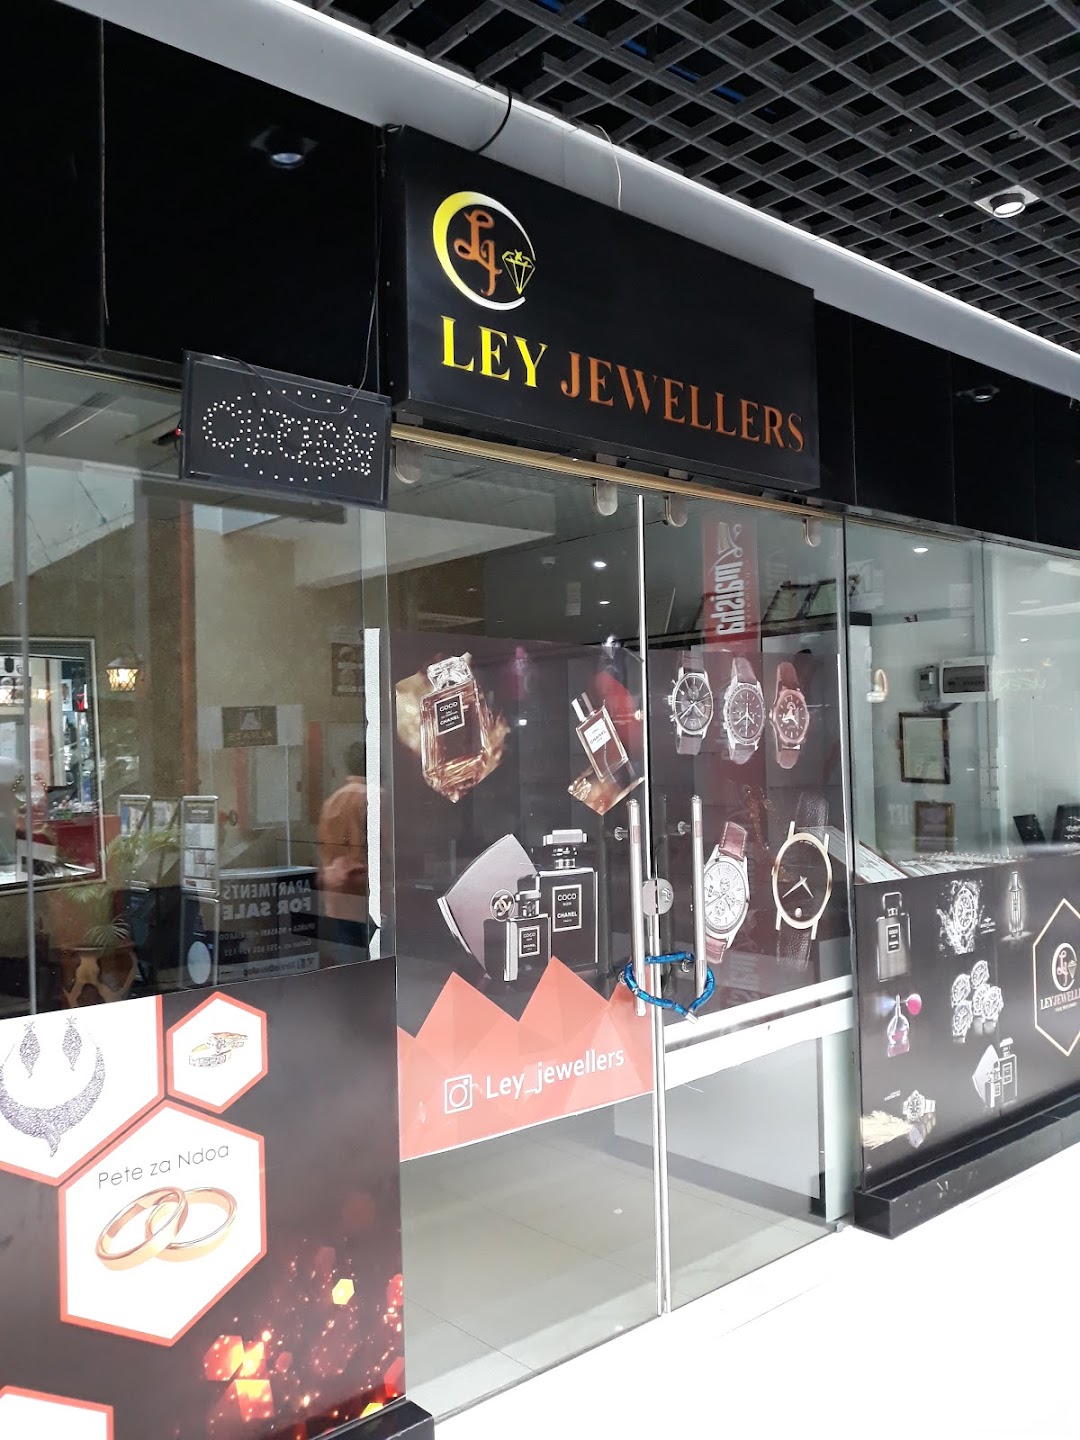 Ley Jewellers